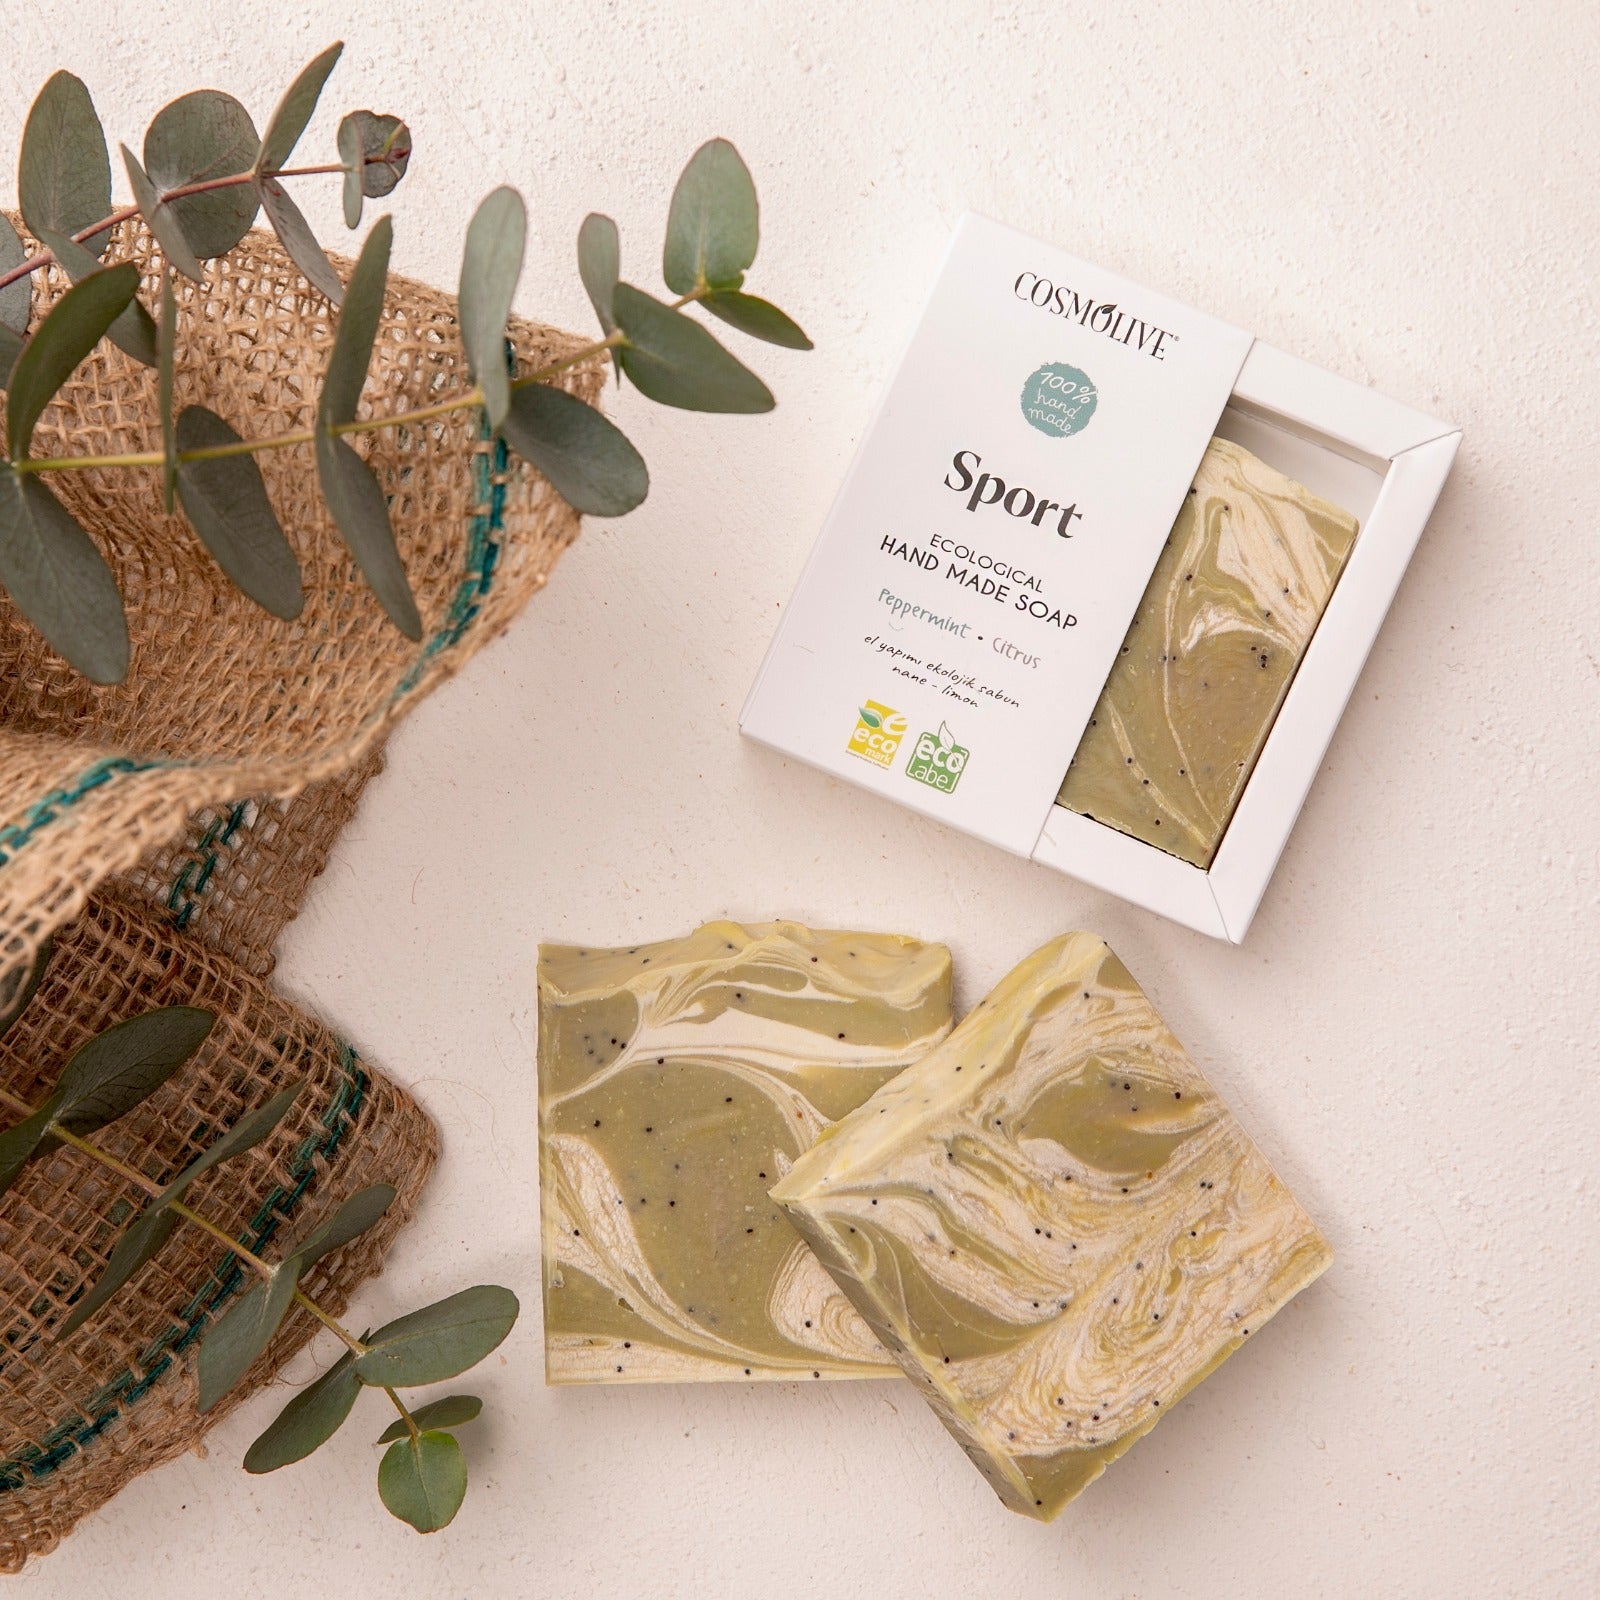 COSMOLIVE HANDMADE NATURAL SOAP SPORT 100 g / Handmade / Ecological /Unique Bathroom Experience / Natural PH / Natural Life